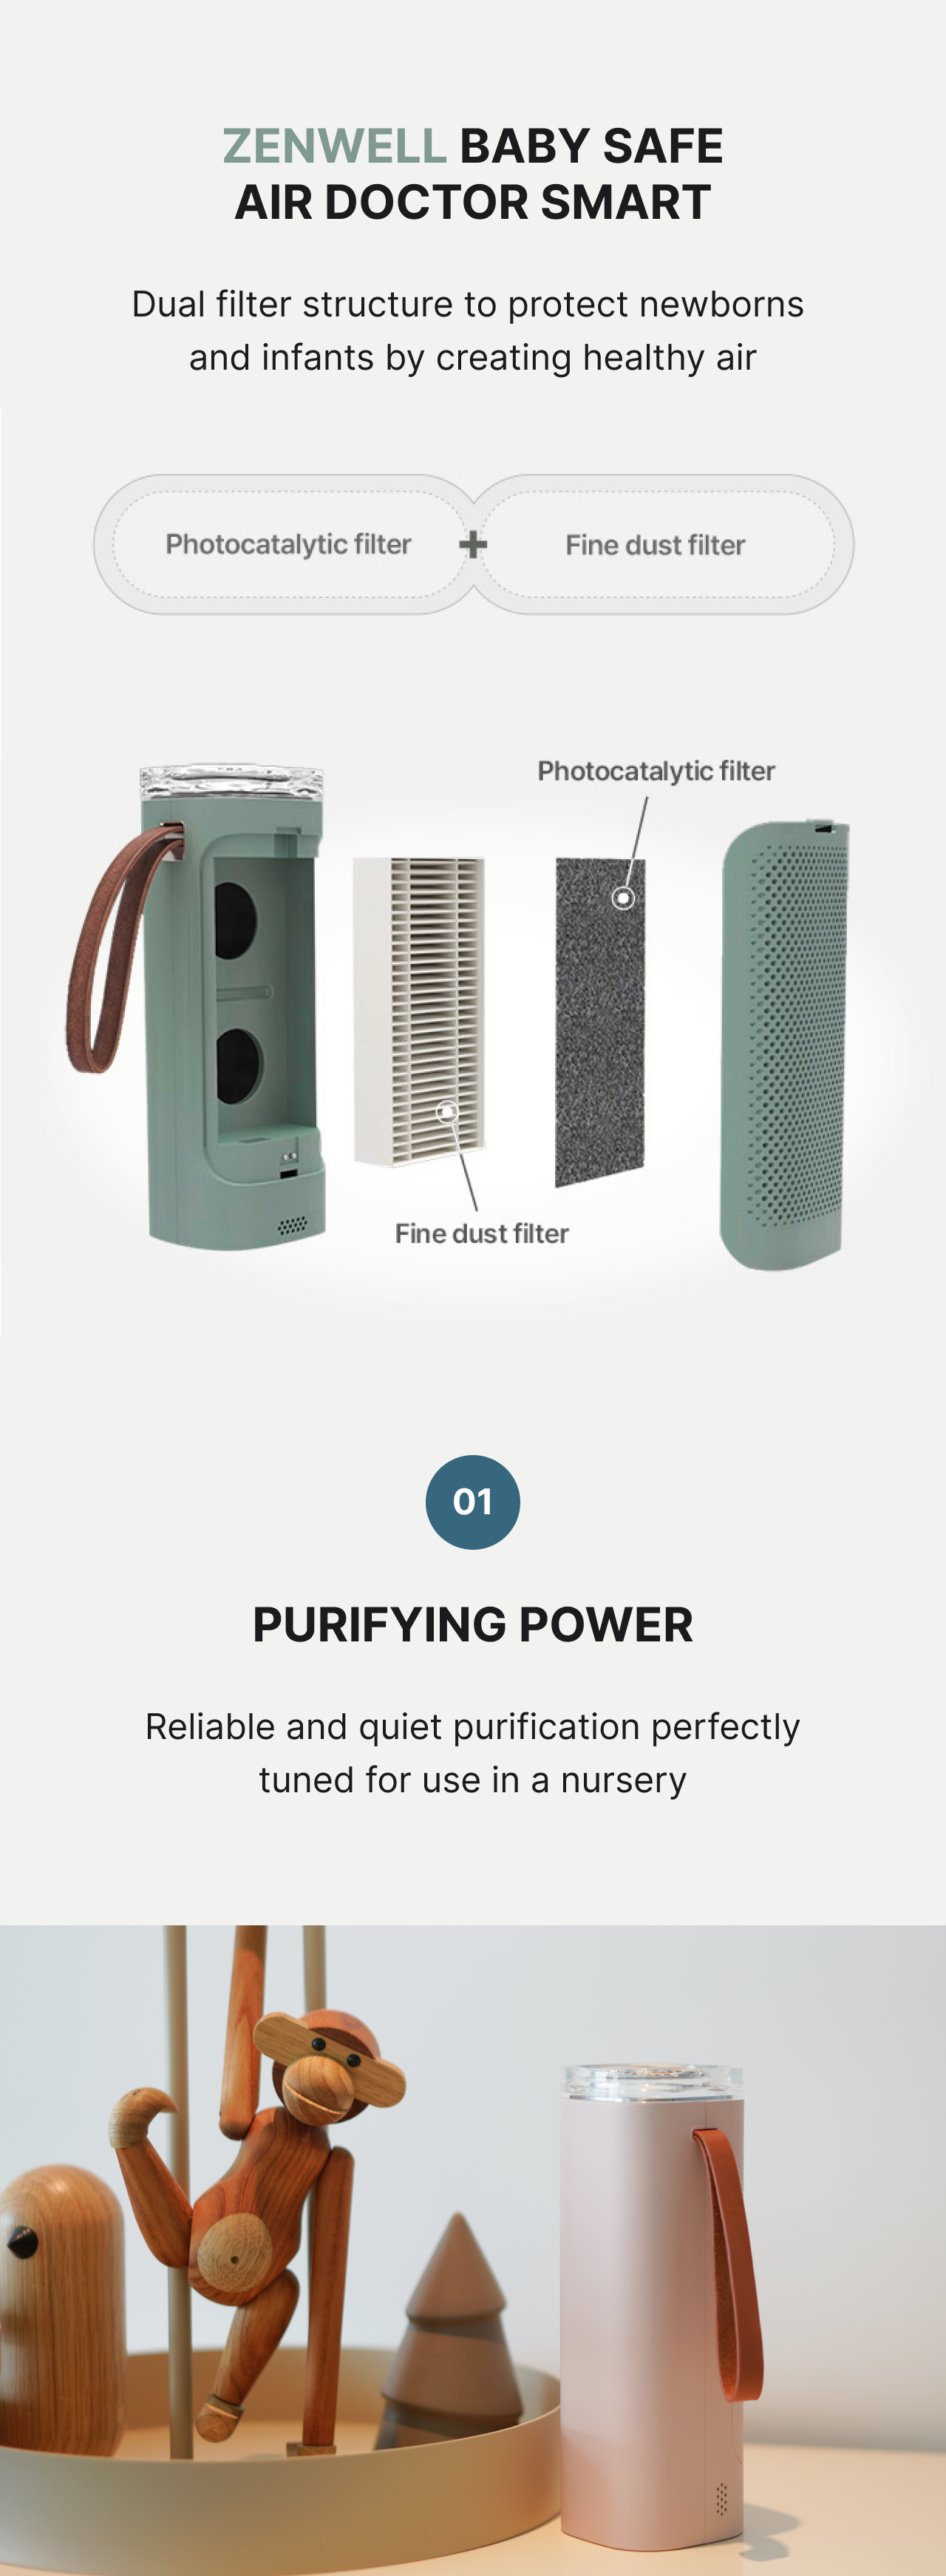 Baby Safe Air Doctor Smart product description image with rendering showing contents of the purifier and saying the reliable and quiet purification is perfect for a baby's nursery